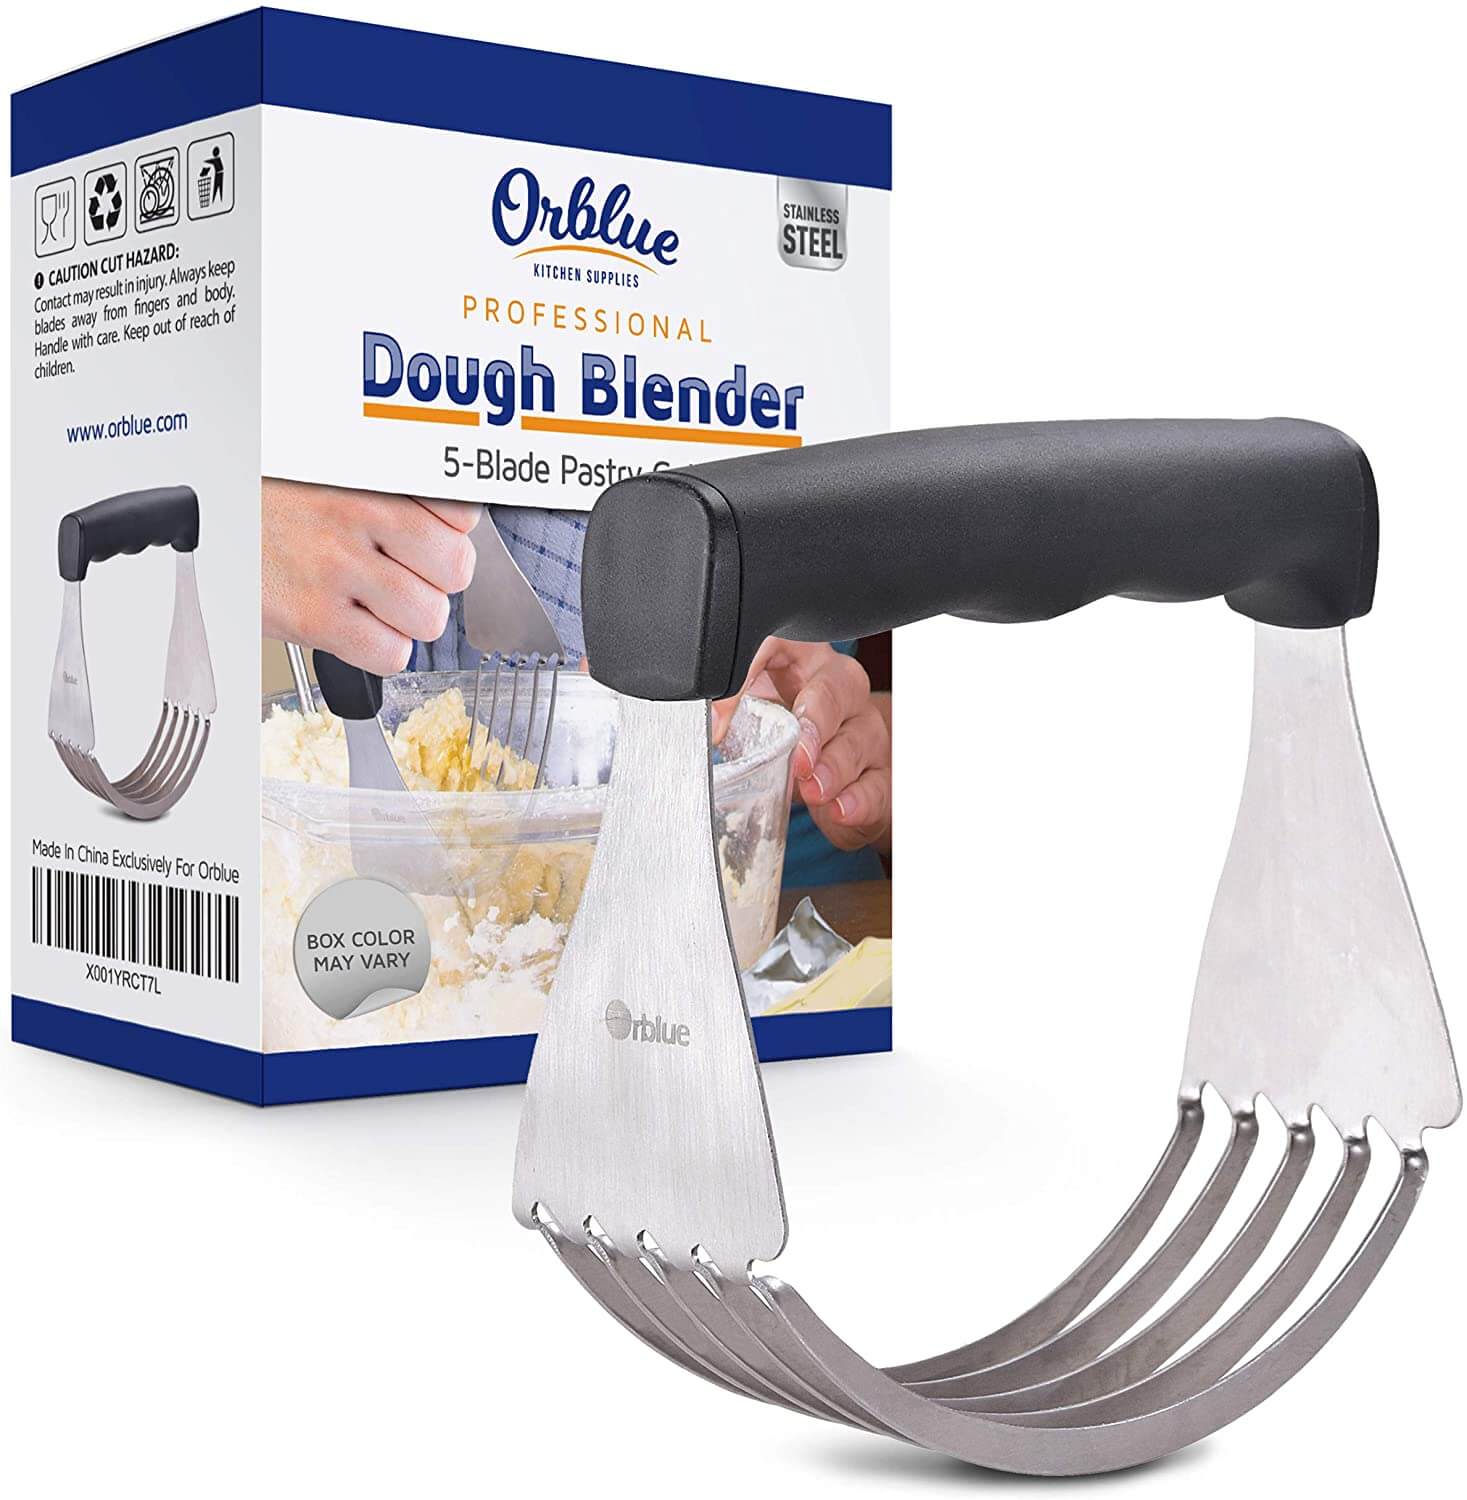 Last Confection Dough Blender, Professional Stainless Steel Pastry Cutter